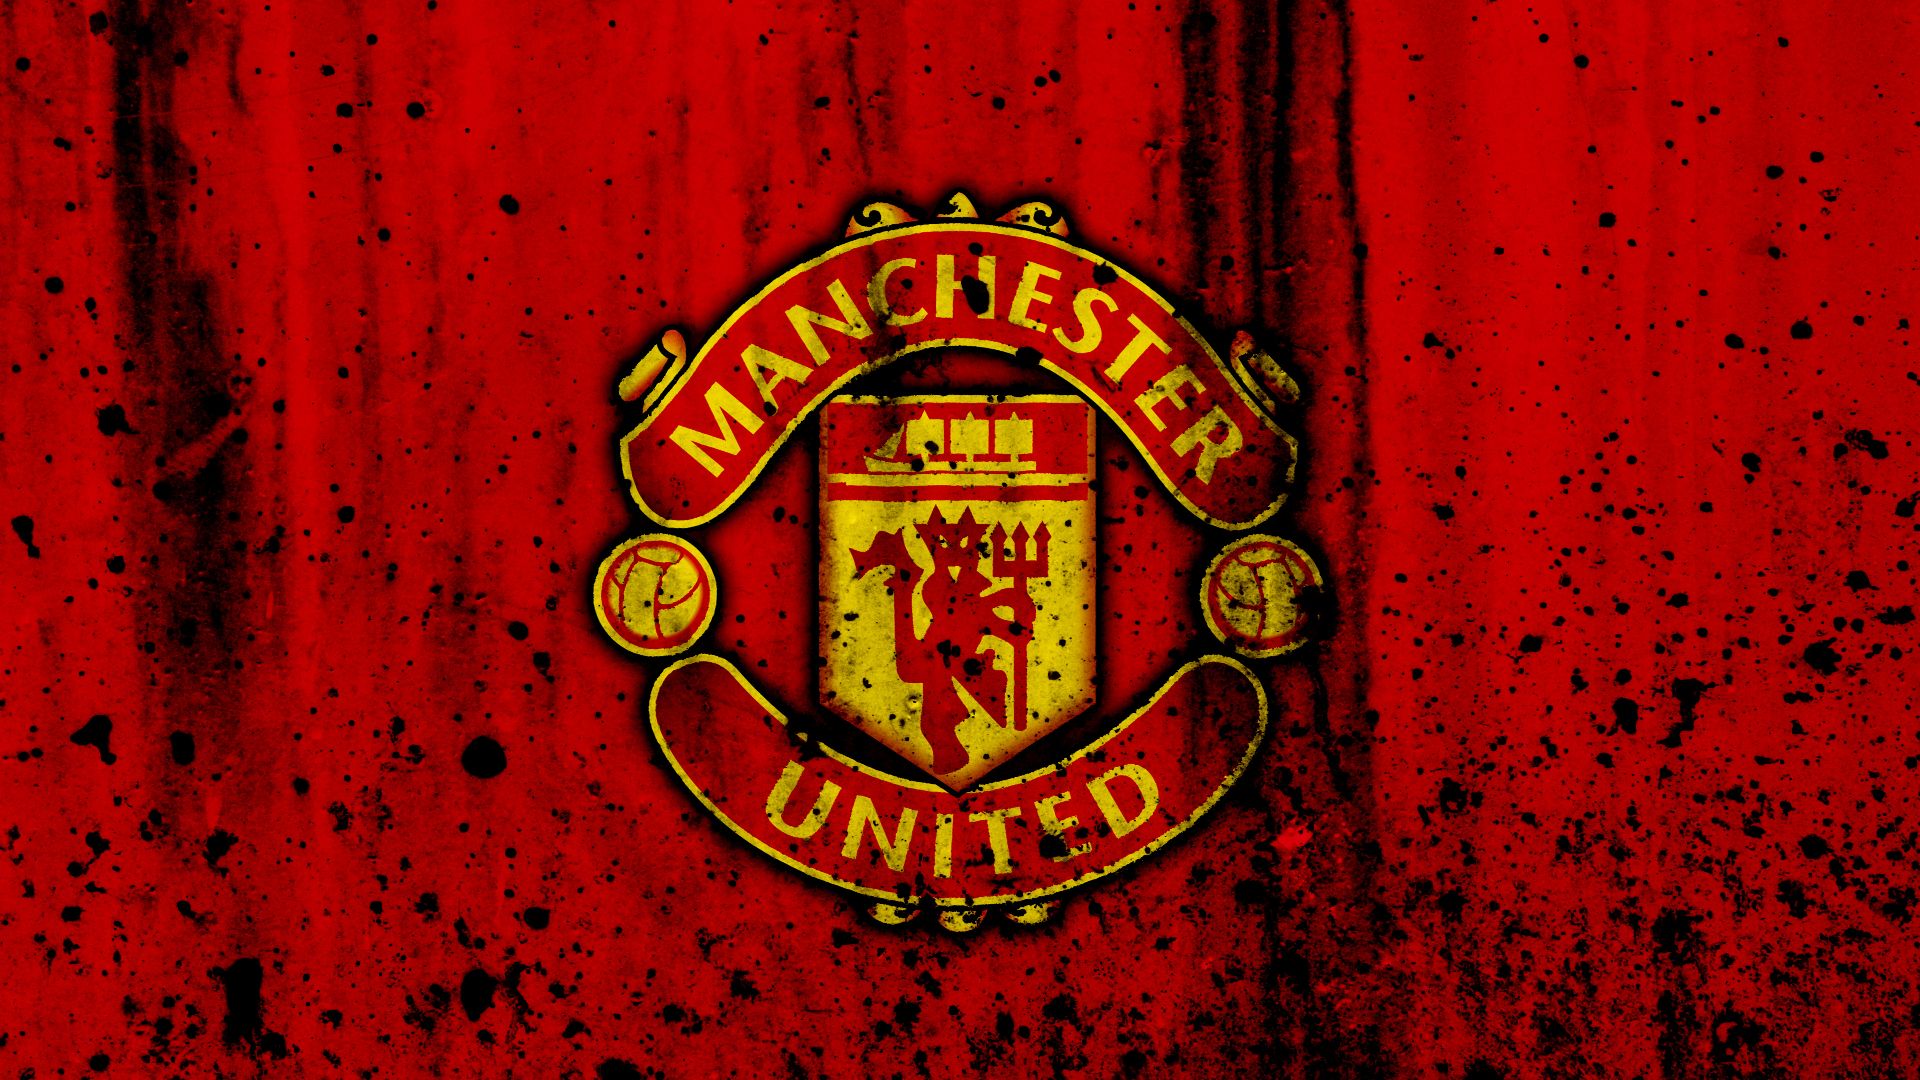 Manchester United 2020 Wallpapers